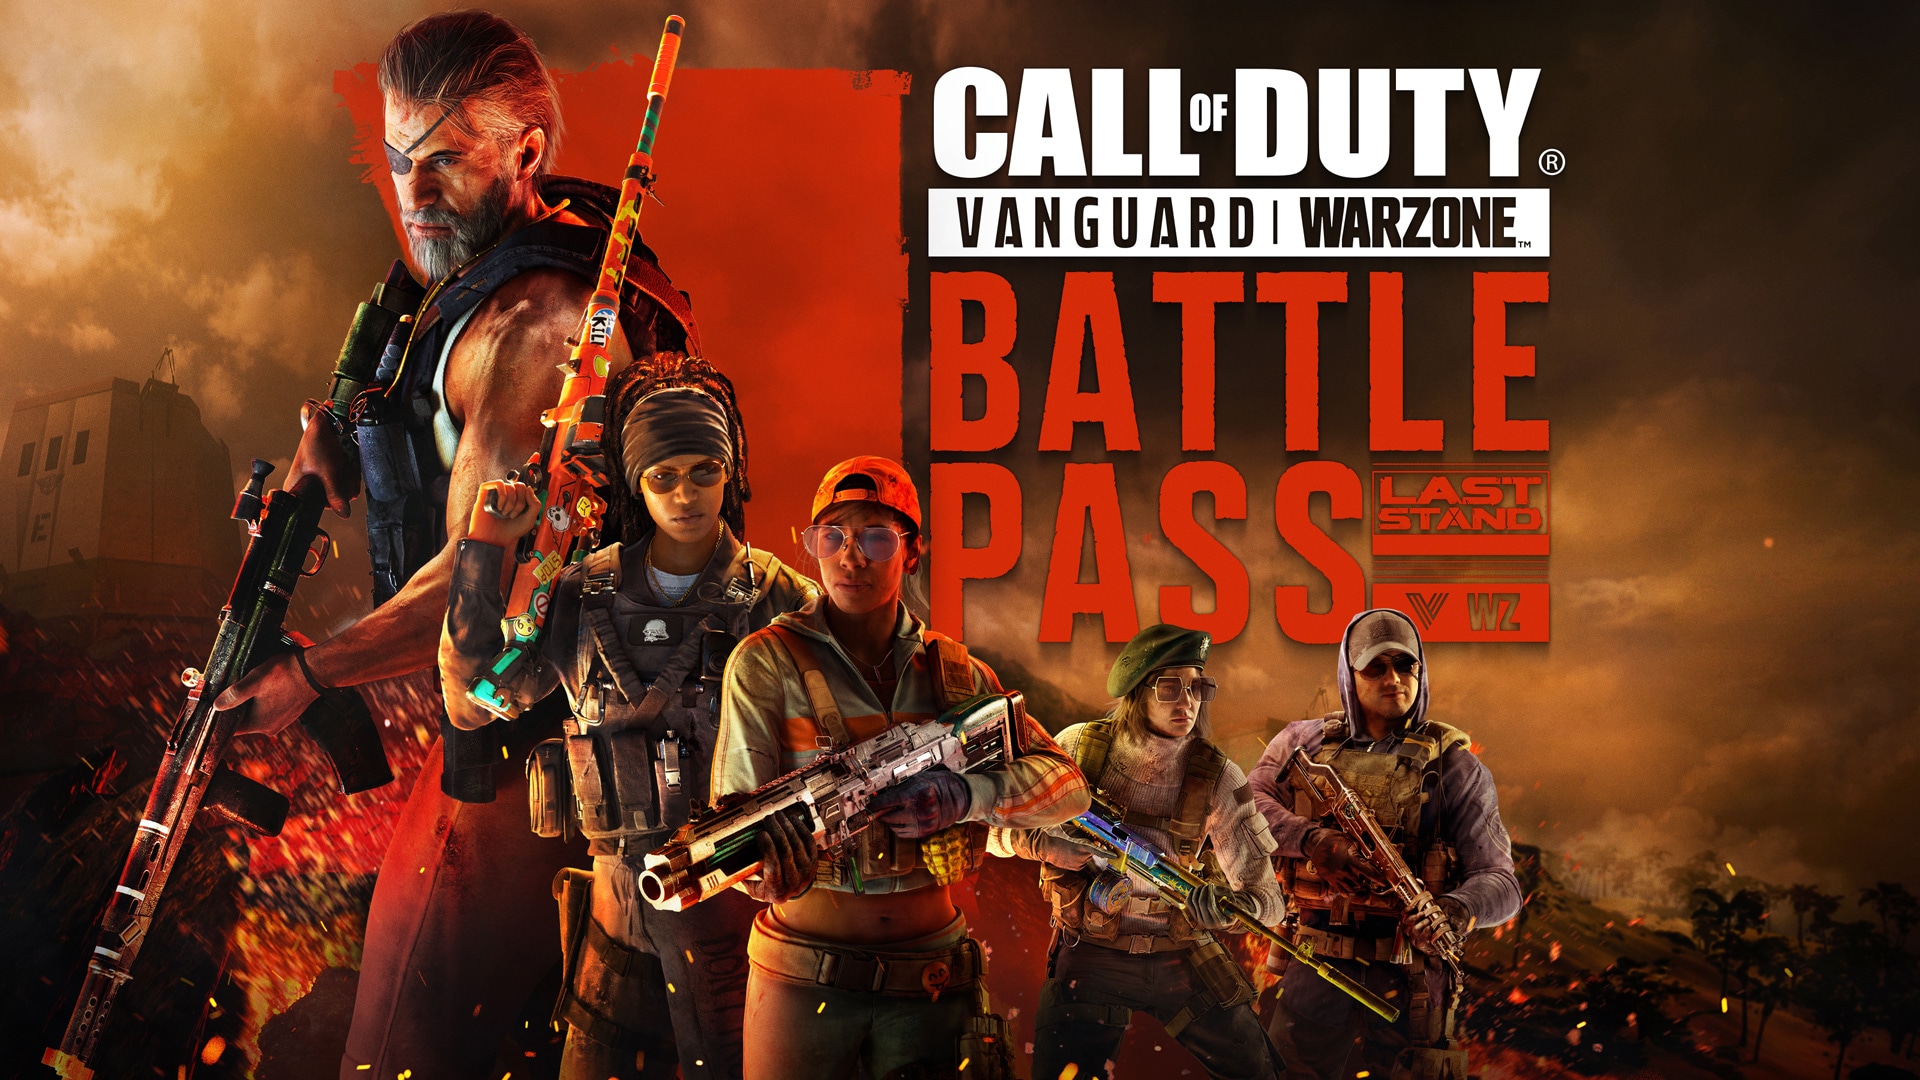 Introducing the Battle Pass and Bundles for Last Stand in Call of Duty: Vanguard and Call of Duty: Warzone